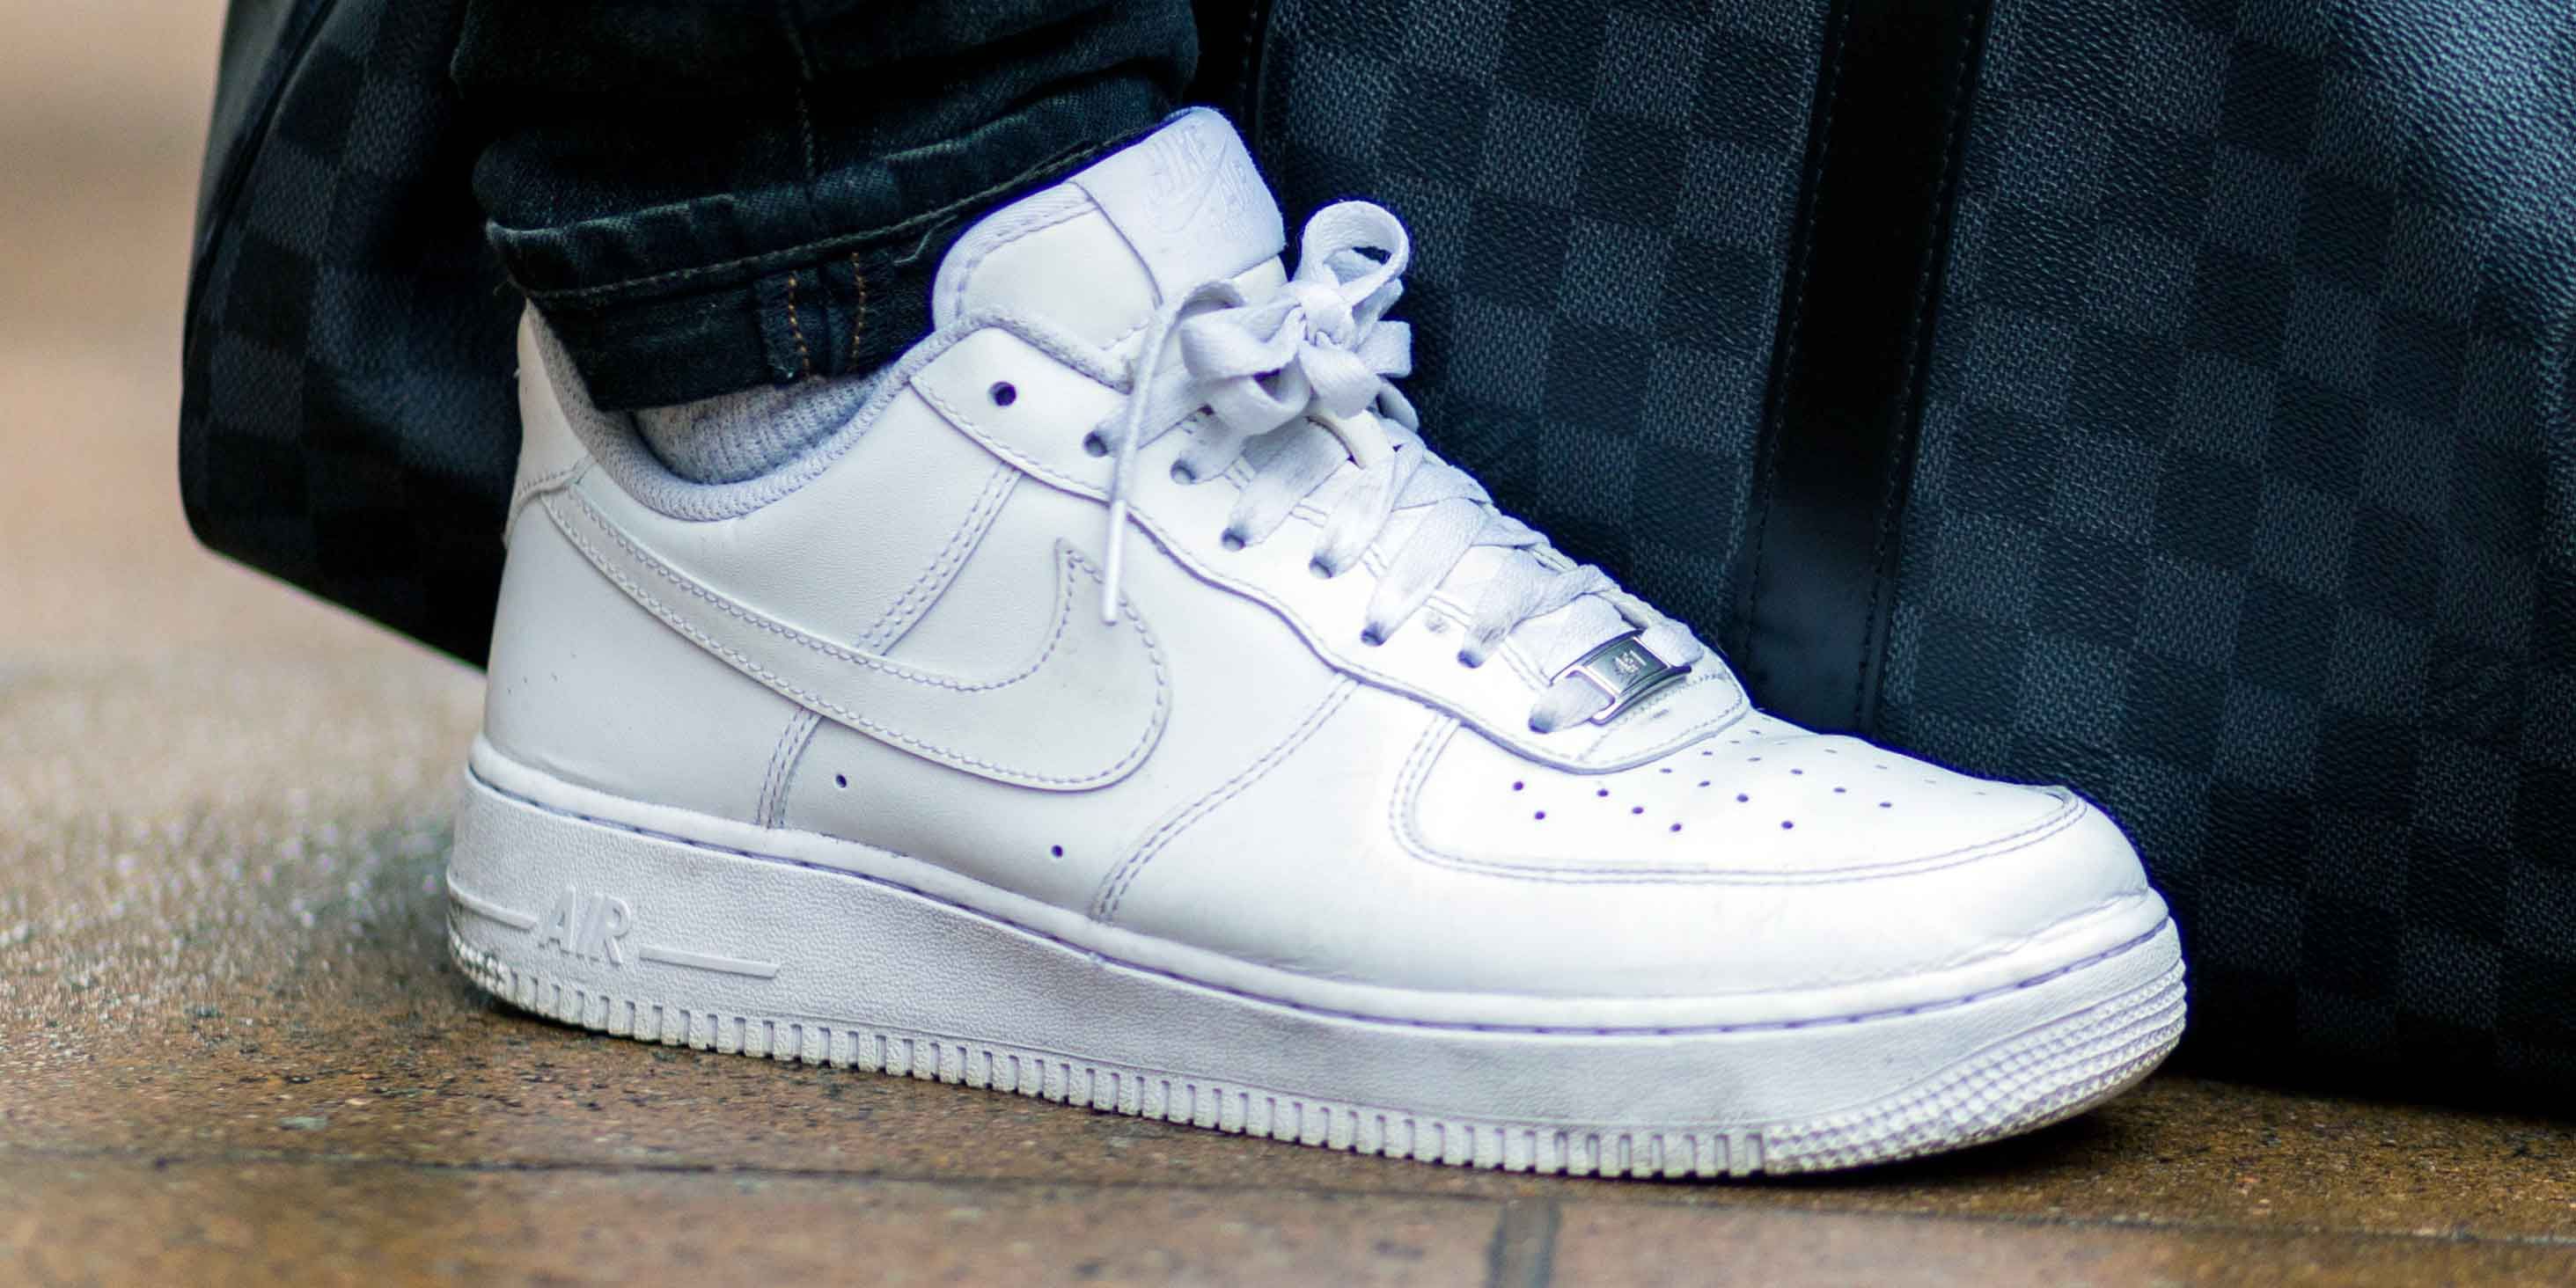 Nike Air Force 1s Provide Classic Style